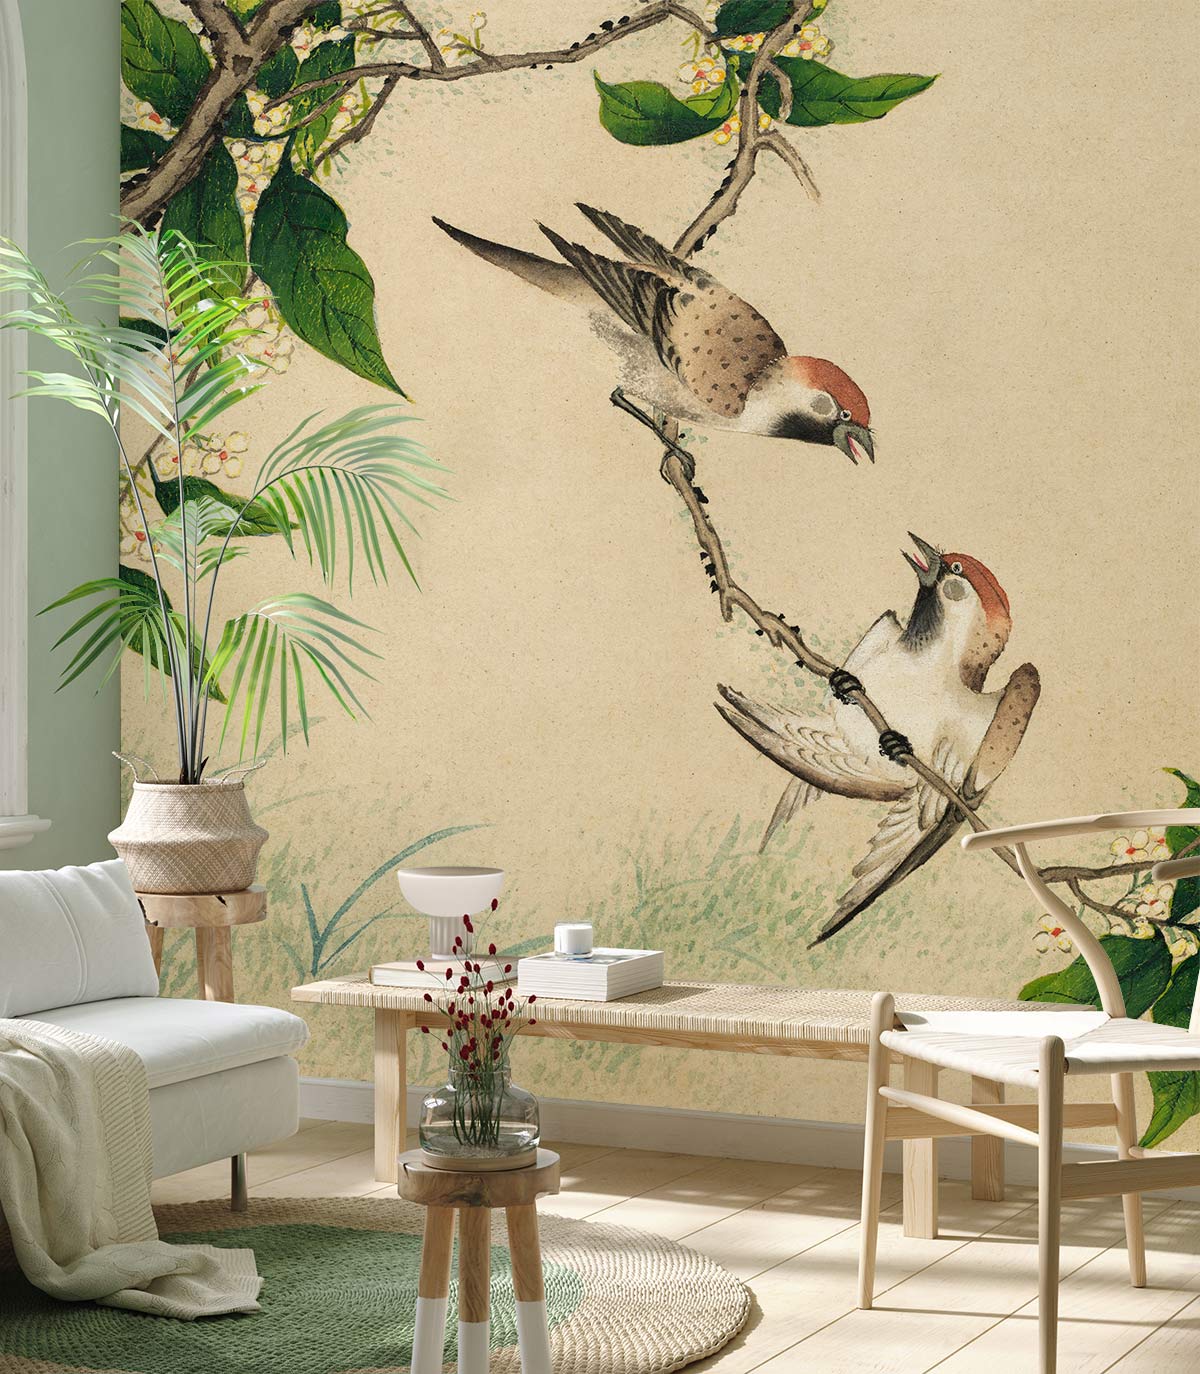 Gossiping Sparrows painting Animal Wallpaper Mural Decoration